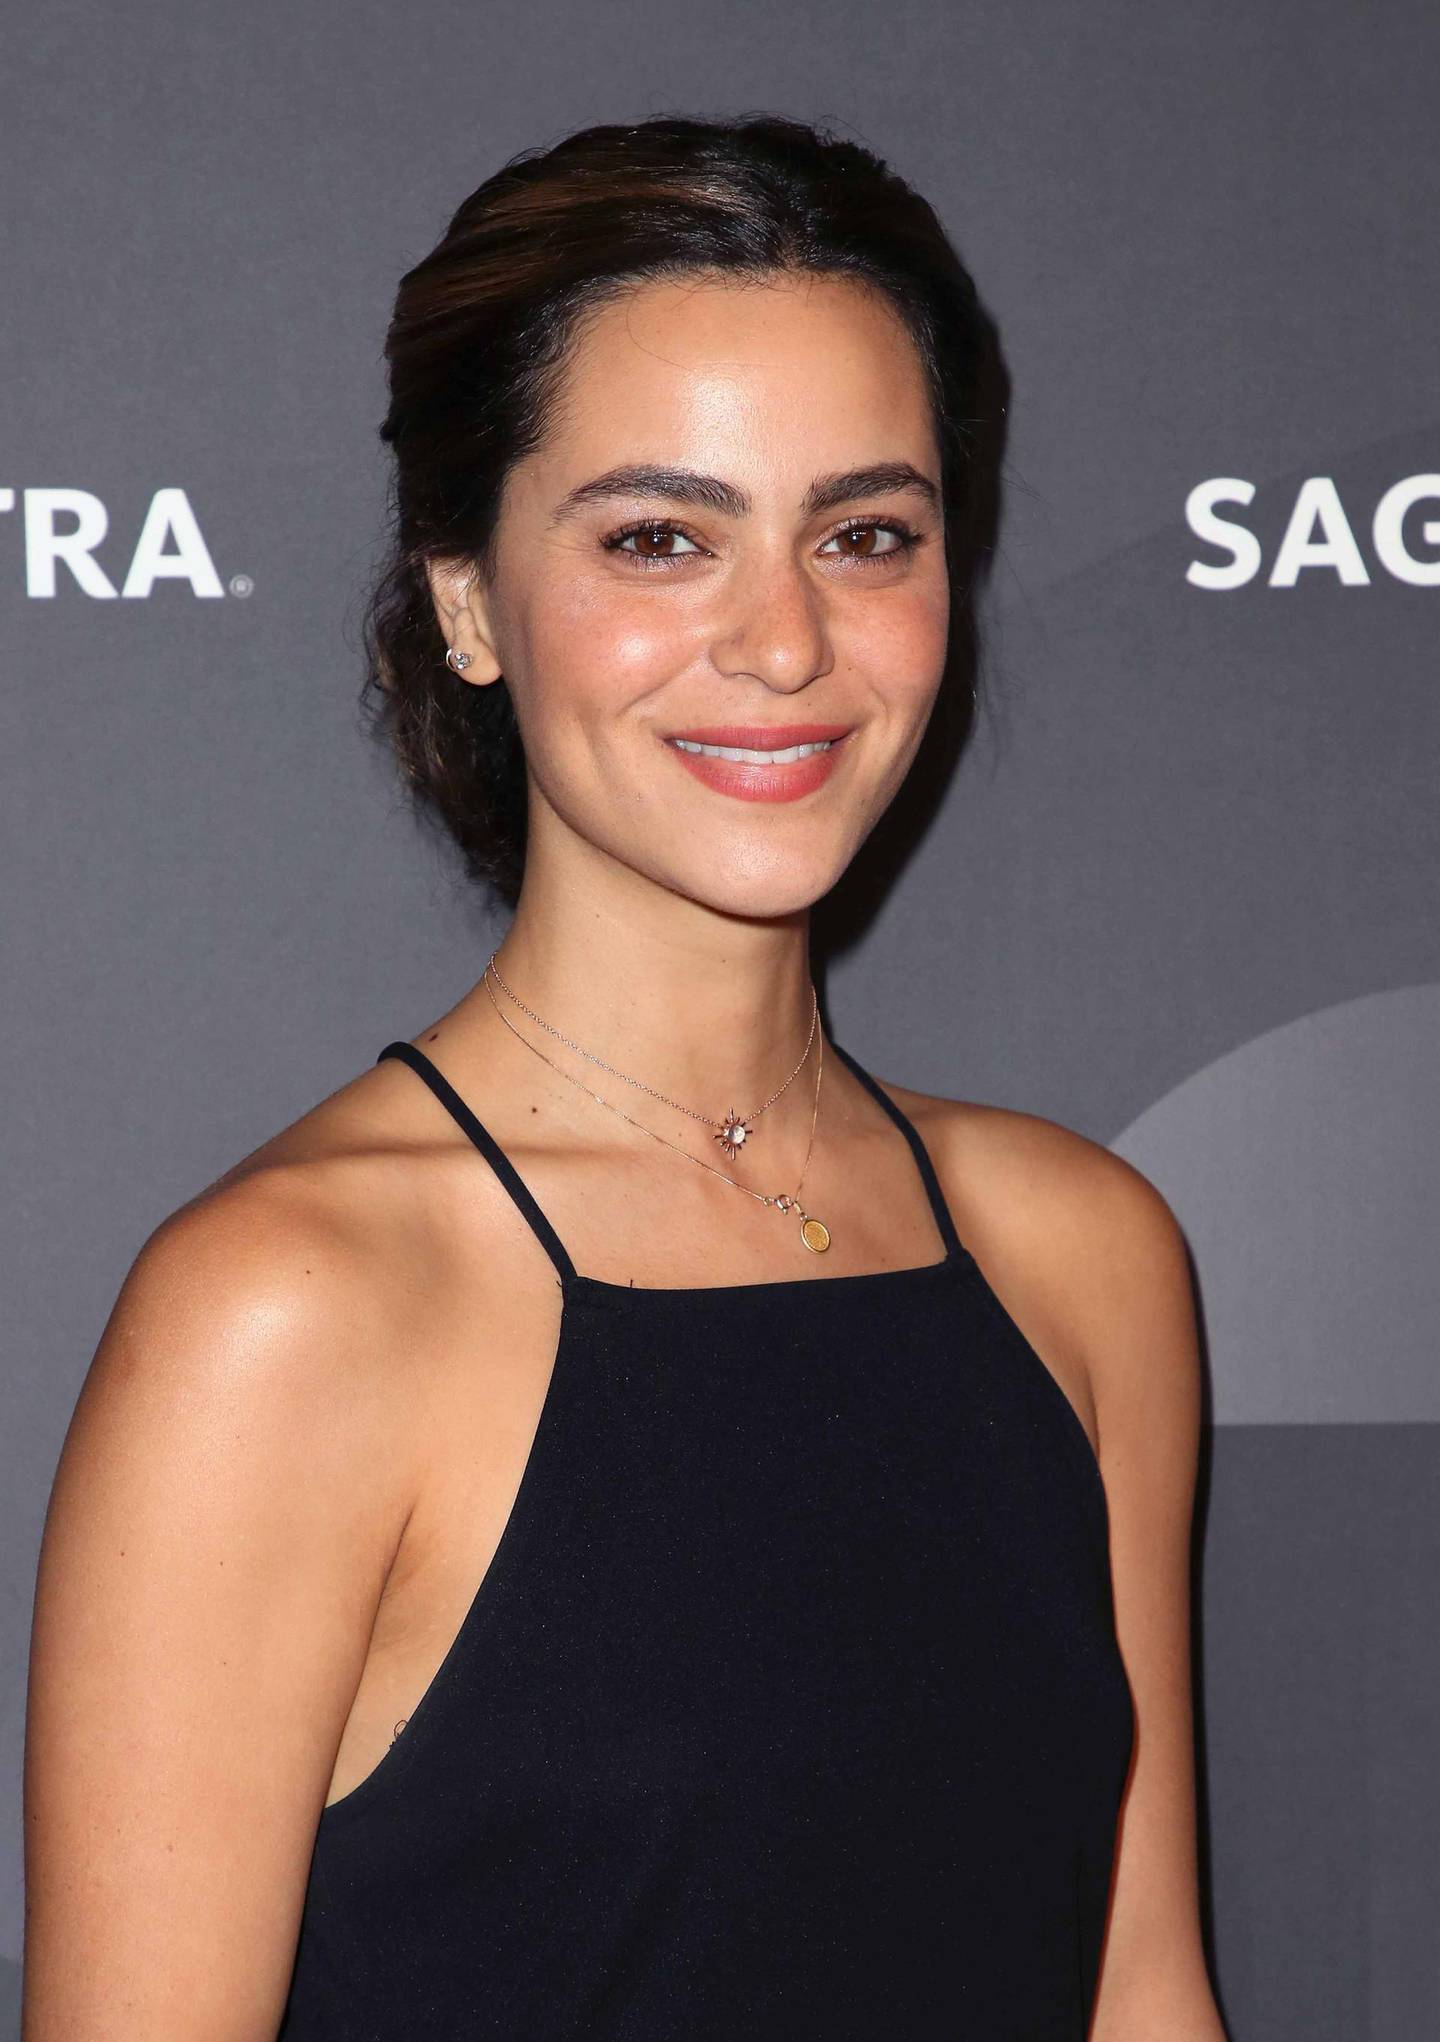 BEVERLY HILLS, CALIFORNIA - OCTOBER 11: May Calamawy attends the 2019 American Scene Awards hosted by SAG-AFTRA at The Beverly Hilton Hotel on October 11, 2019 in Beverly Hills, California.   David Livingston/Getty Images/AFP